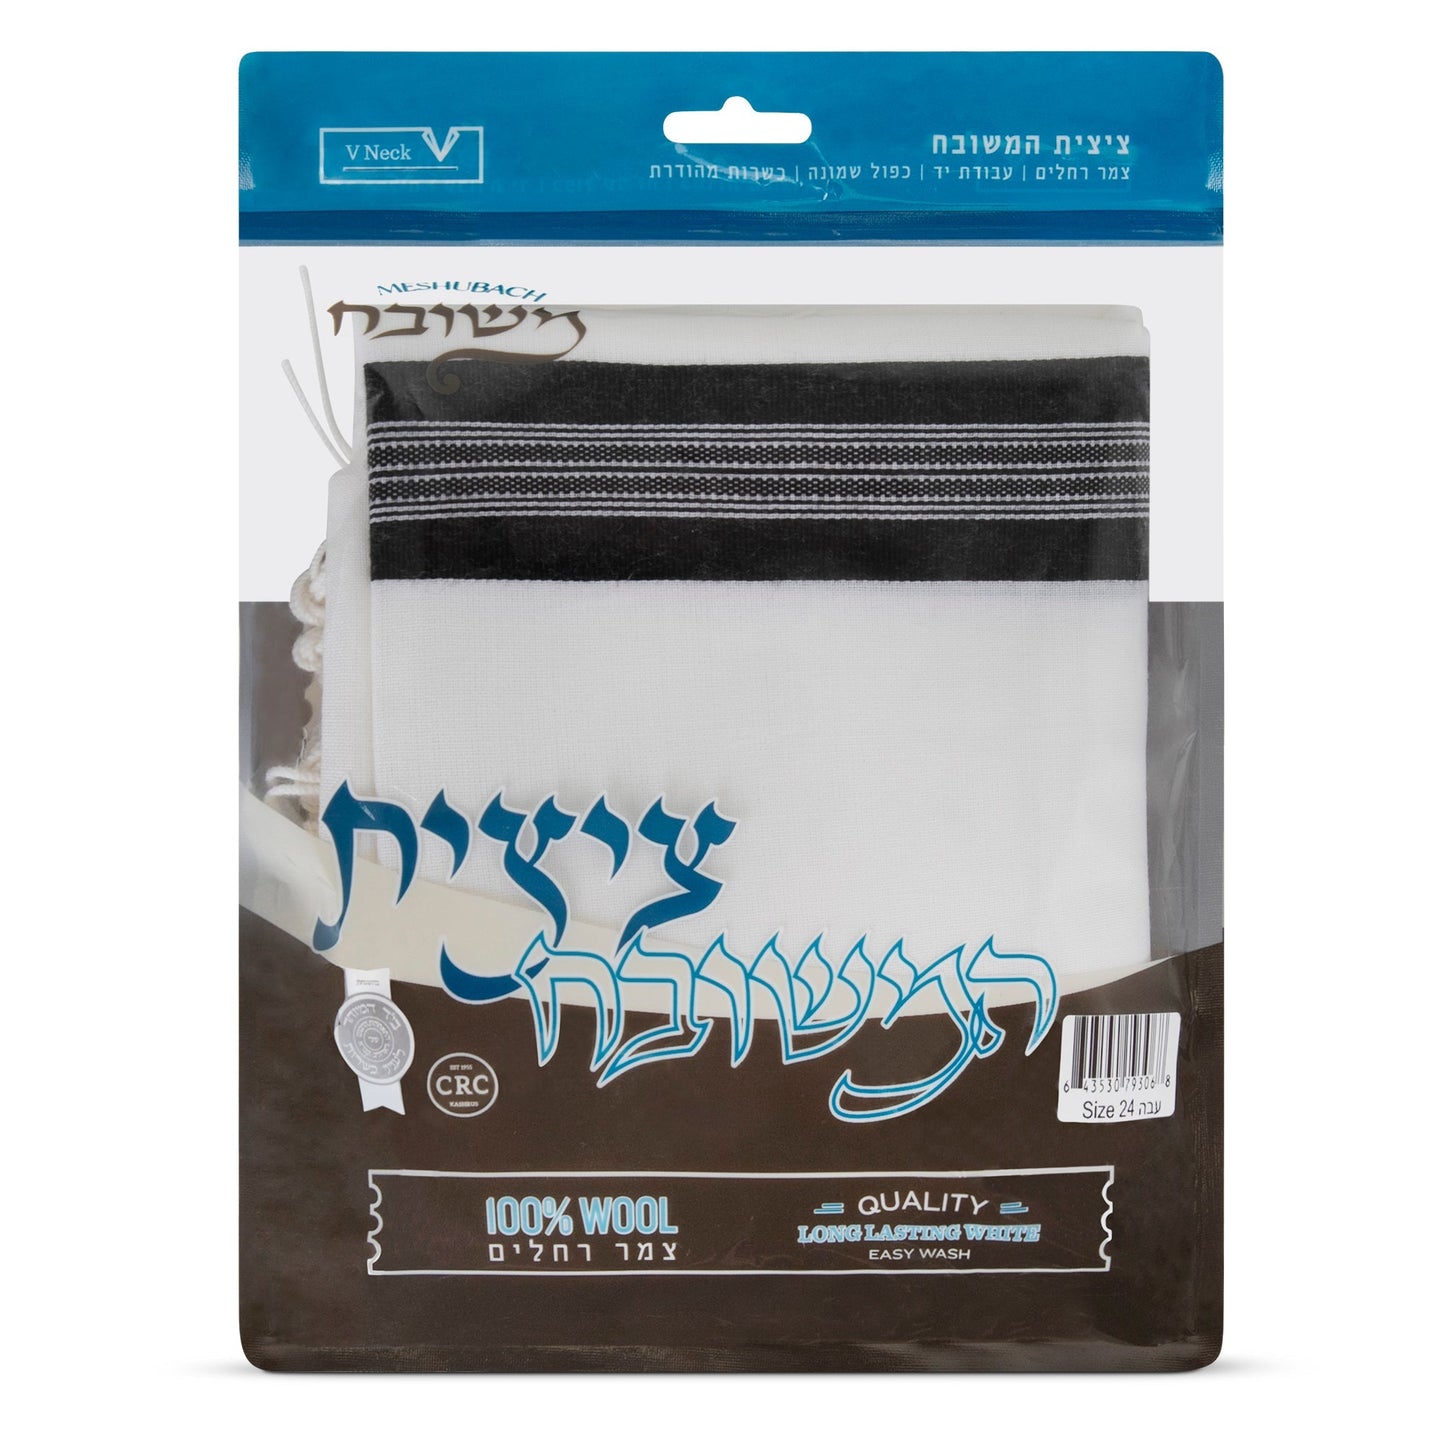 Tzitzis | ציצית | Unknipped with Thin strings in package